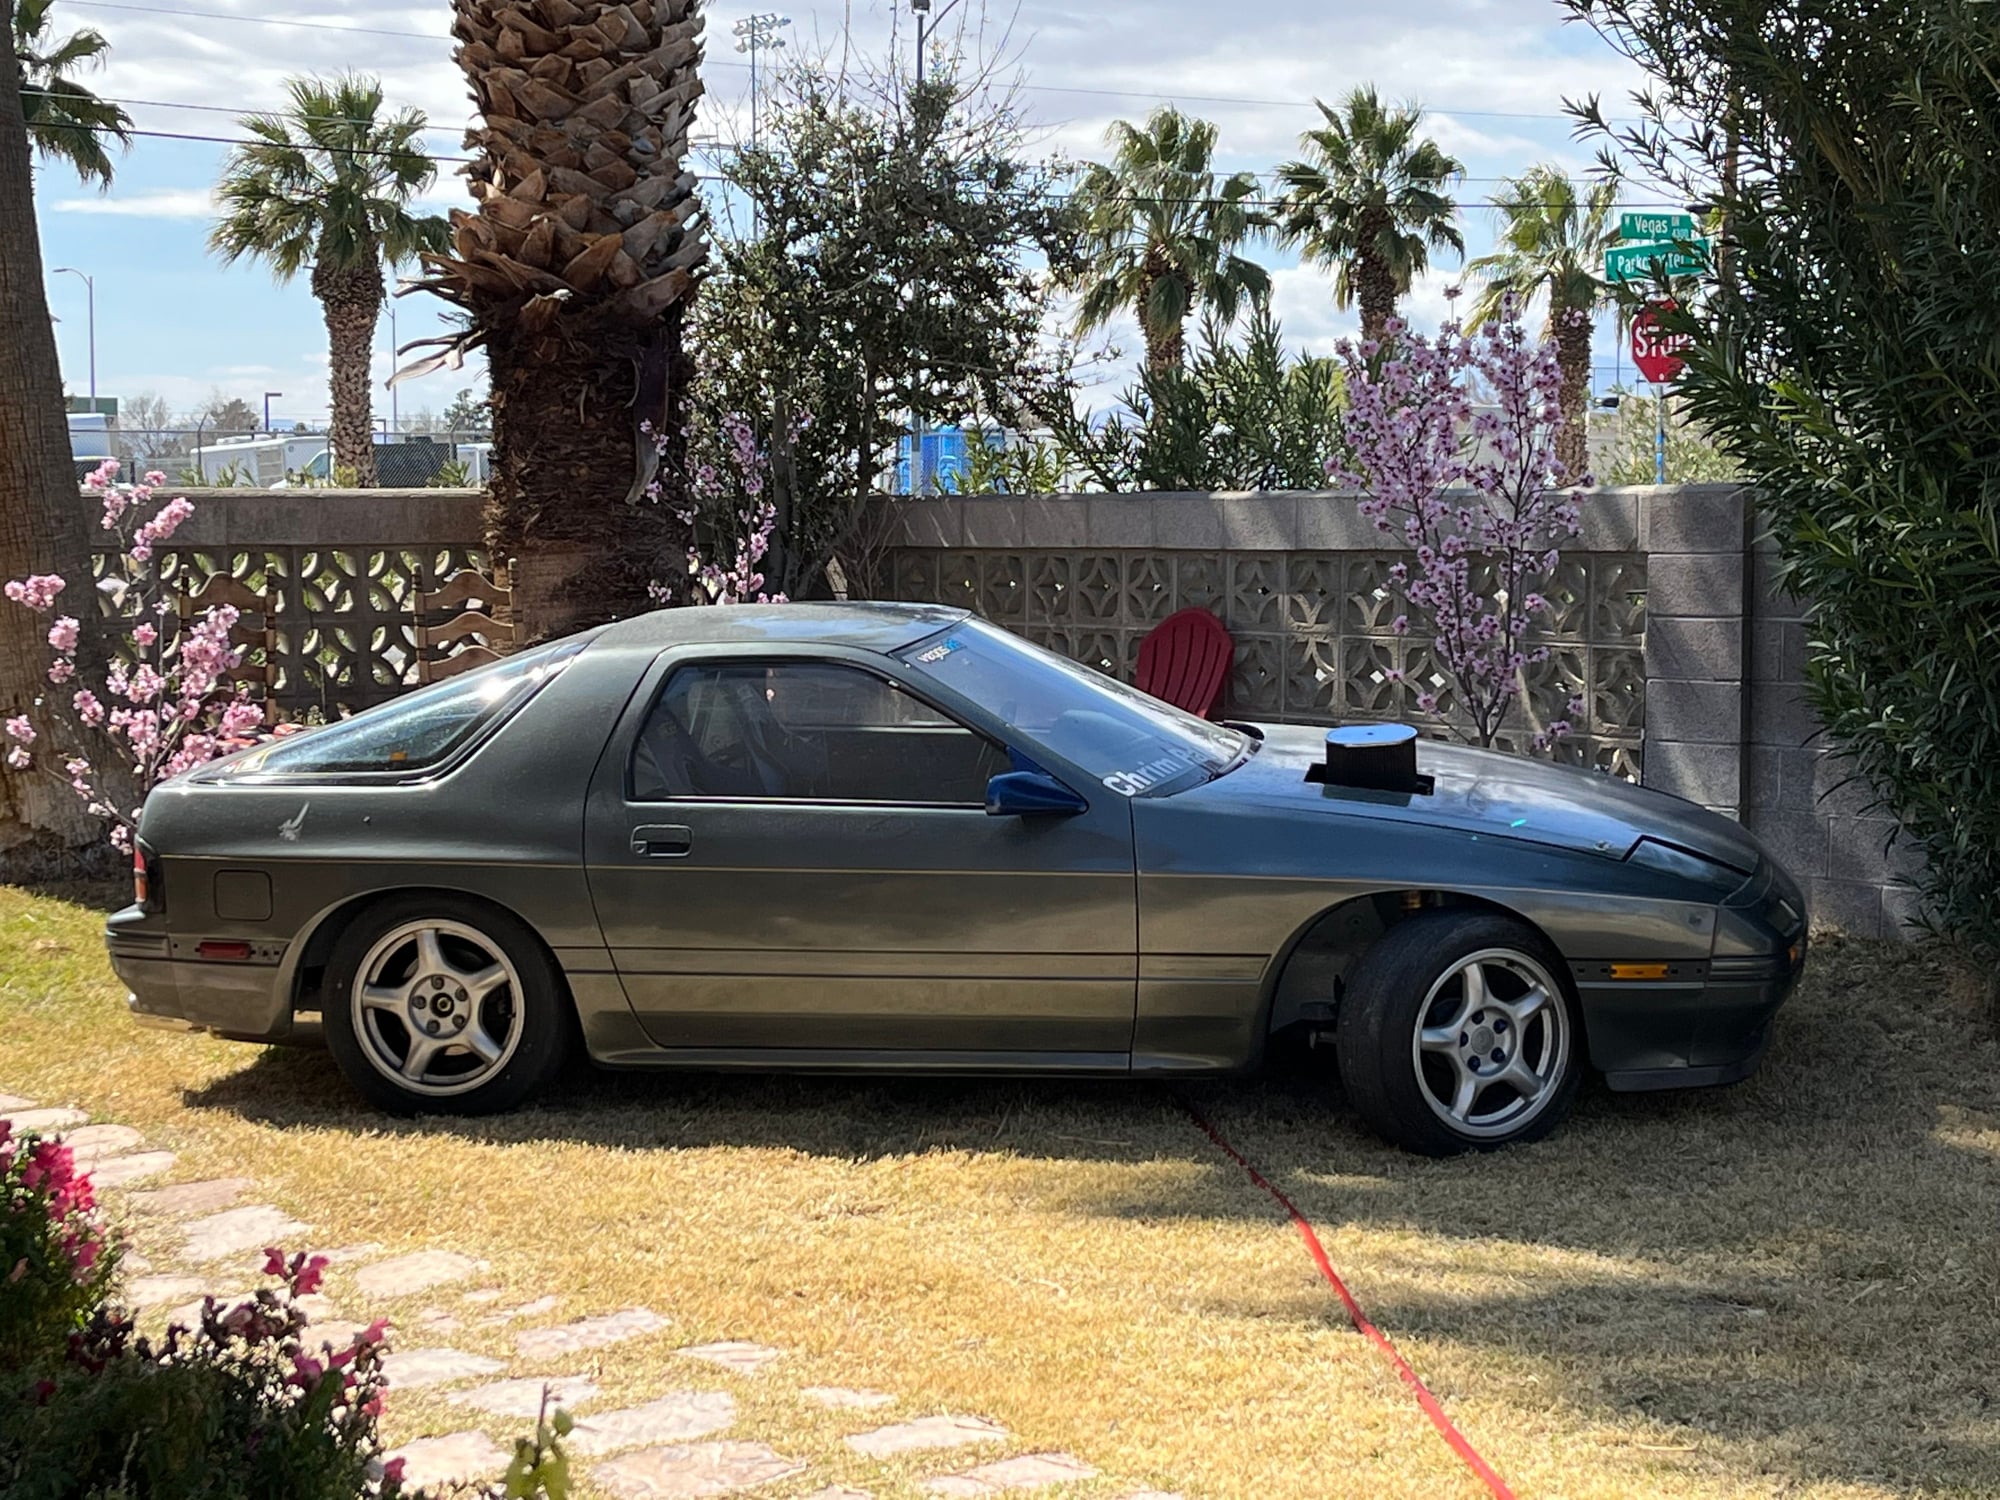 1987 Mazda RX-7 - Normaly Asperated PPort 1987 - Used - Las Vegas, NV 89108, United States